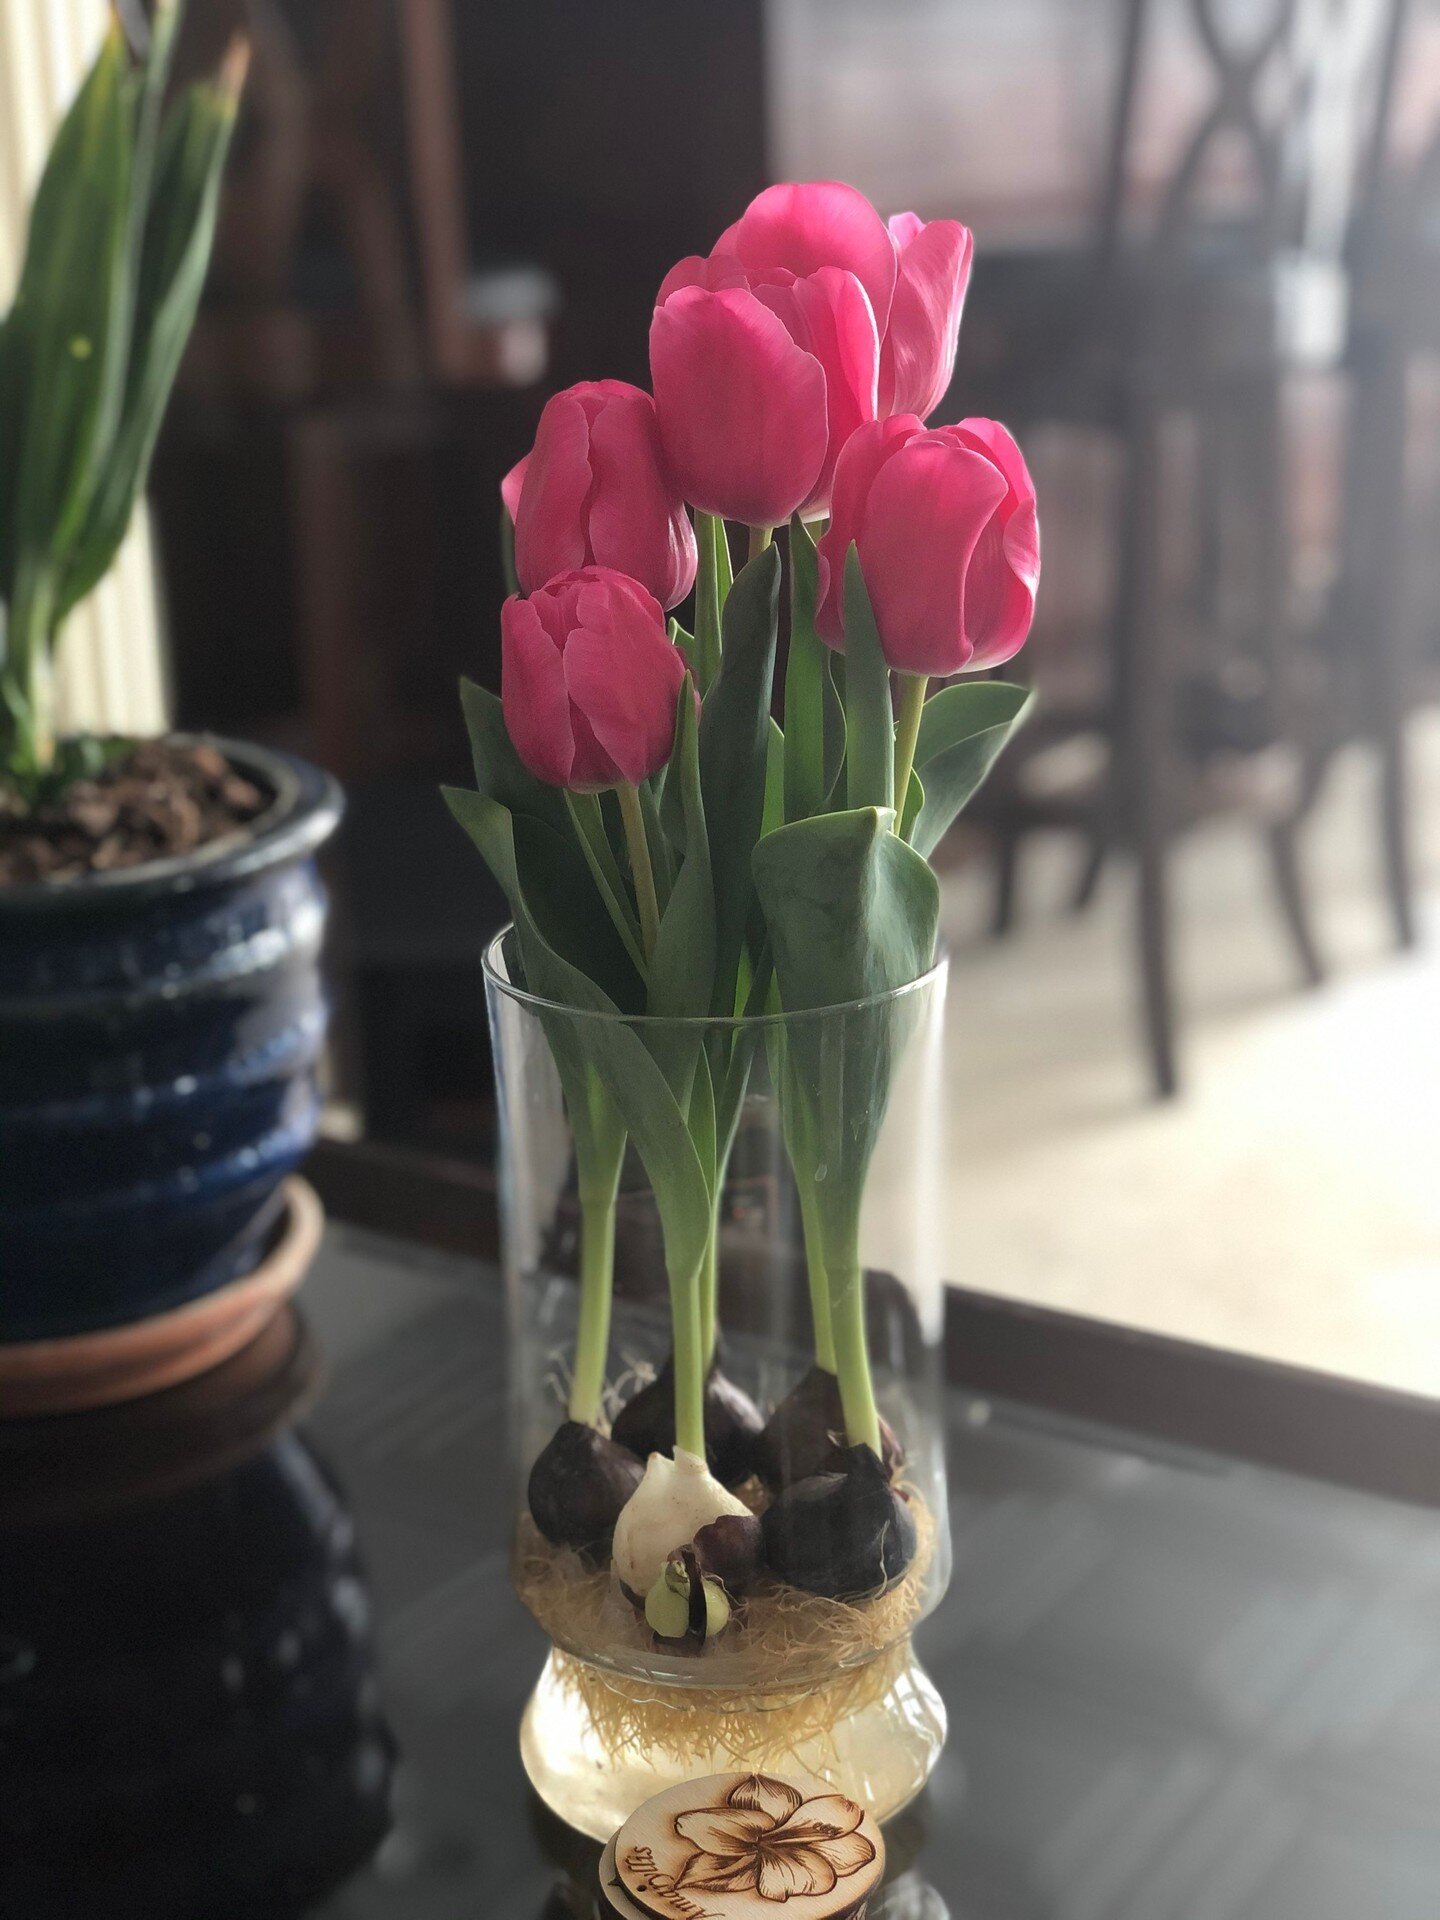 Top Tip Tuesday 🌷: Remember when refilling the water of your tulip vases that only the roots should be submerged but leave the bulbs themselves dry. 💧 This will prevent early decaying of the bulbs

#Tulips #PlantCare #PlantLove #Gardening #HomeDeco